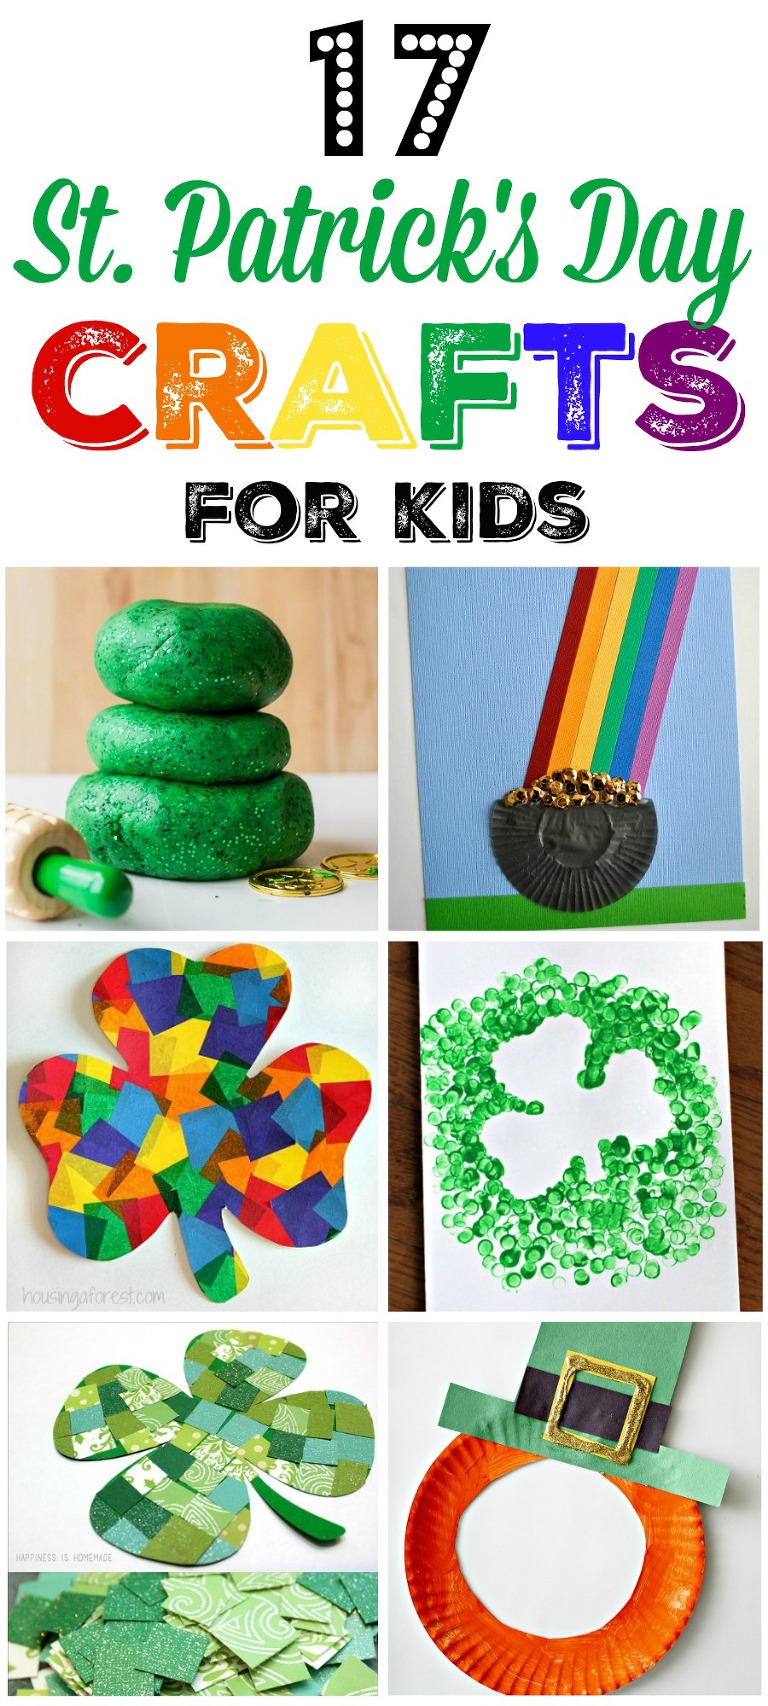 17 fun and easy St. Patrick's day crafts for kids